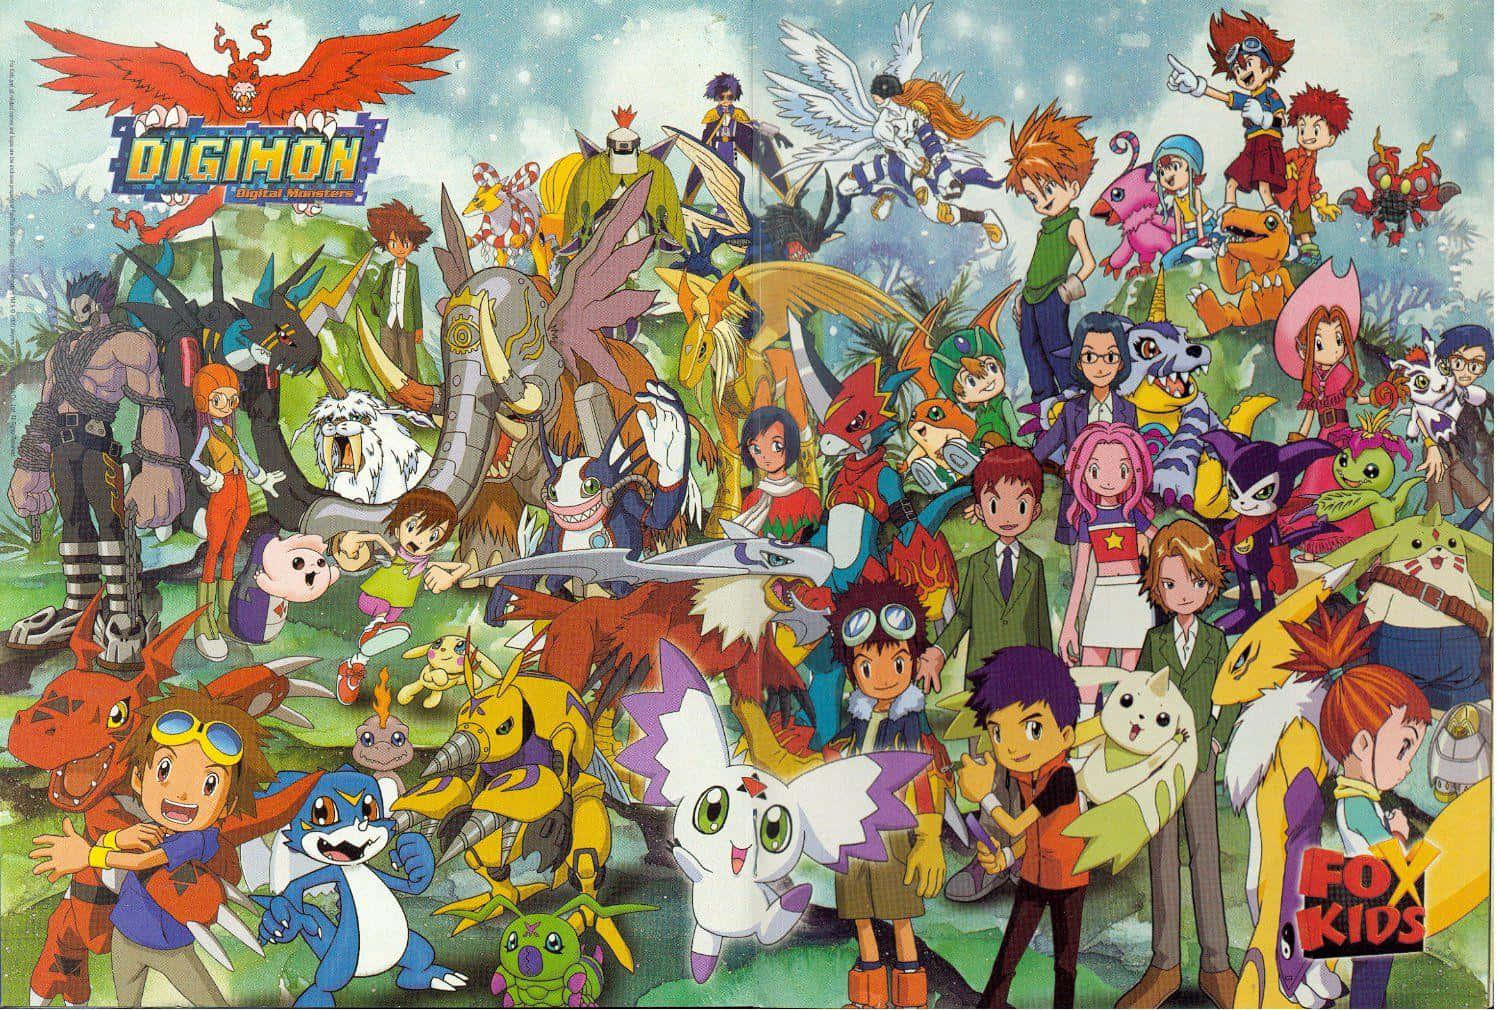 "Catch your favorite Digimon with courage and friendship!"